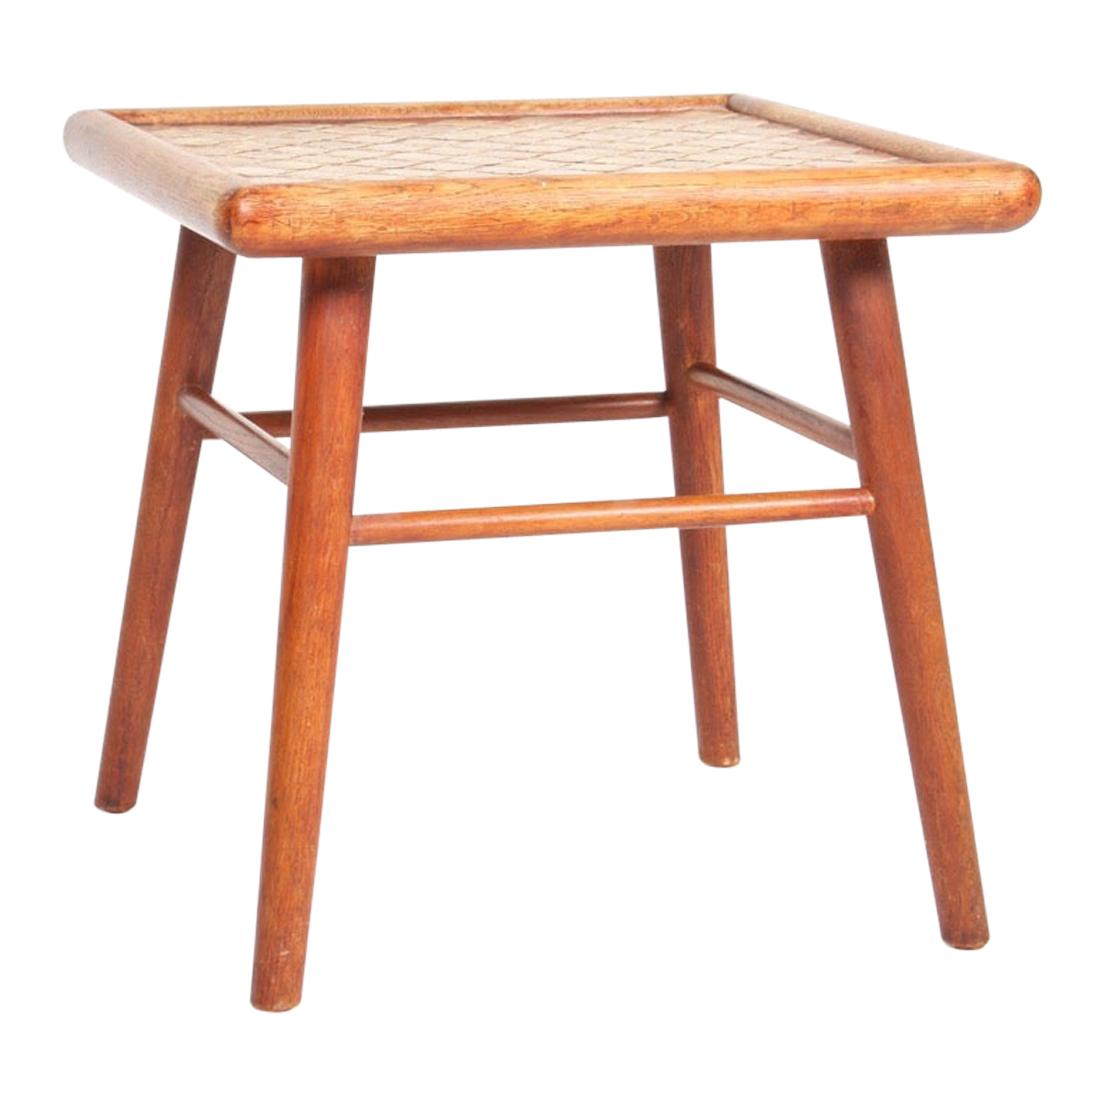 Danish Midcentury Side Table in Patinated Oak and Porcelain, 1940